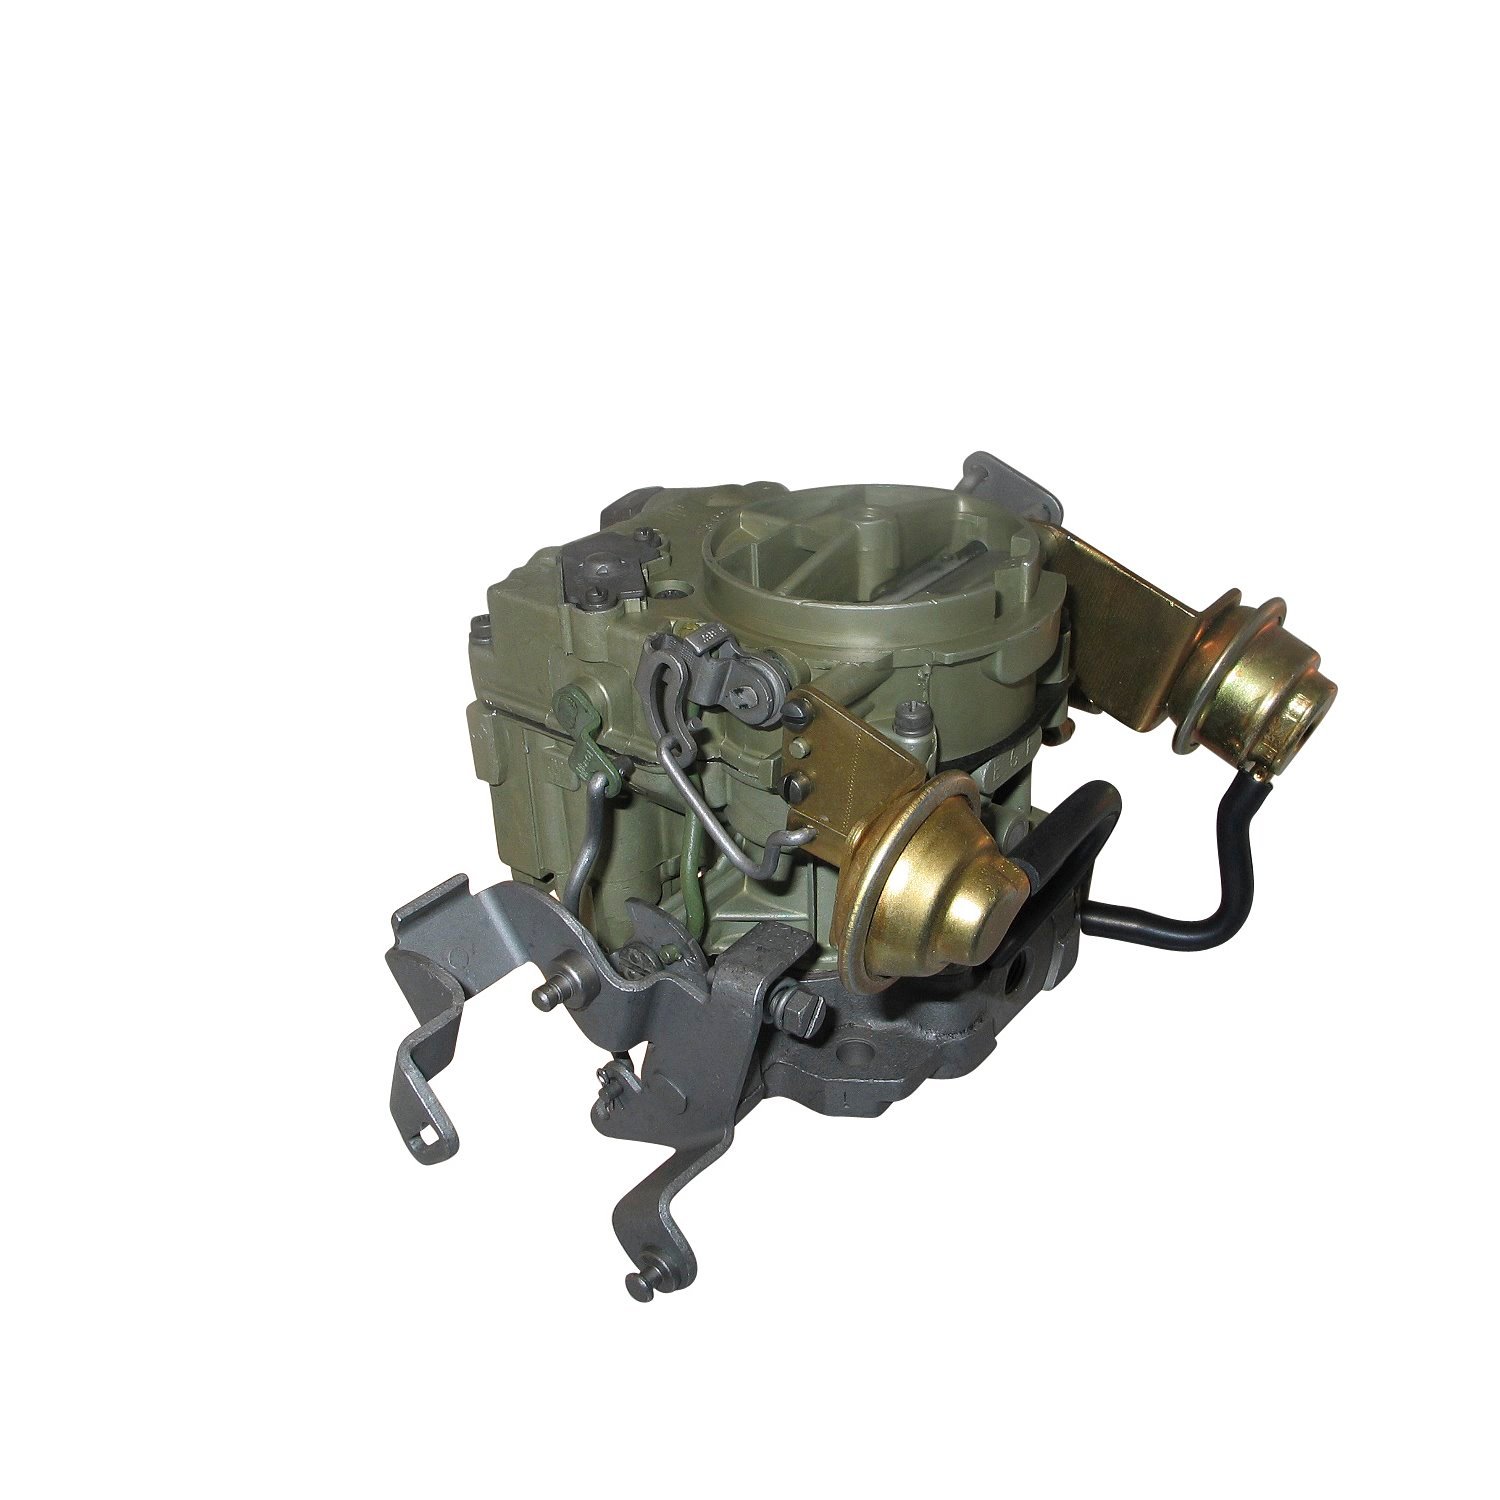 1-291 Rochester Remanufactured Carburetor, 2GC-Style